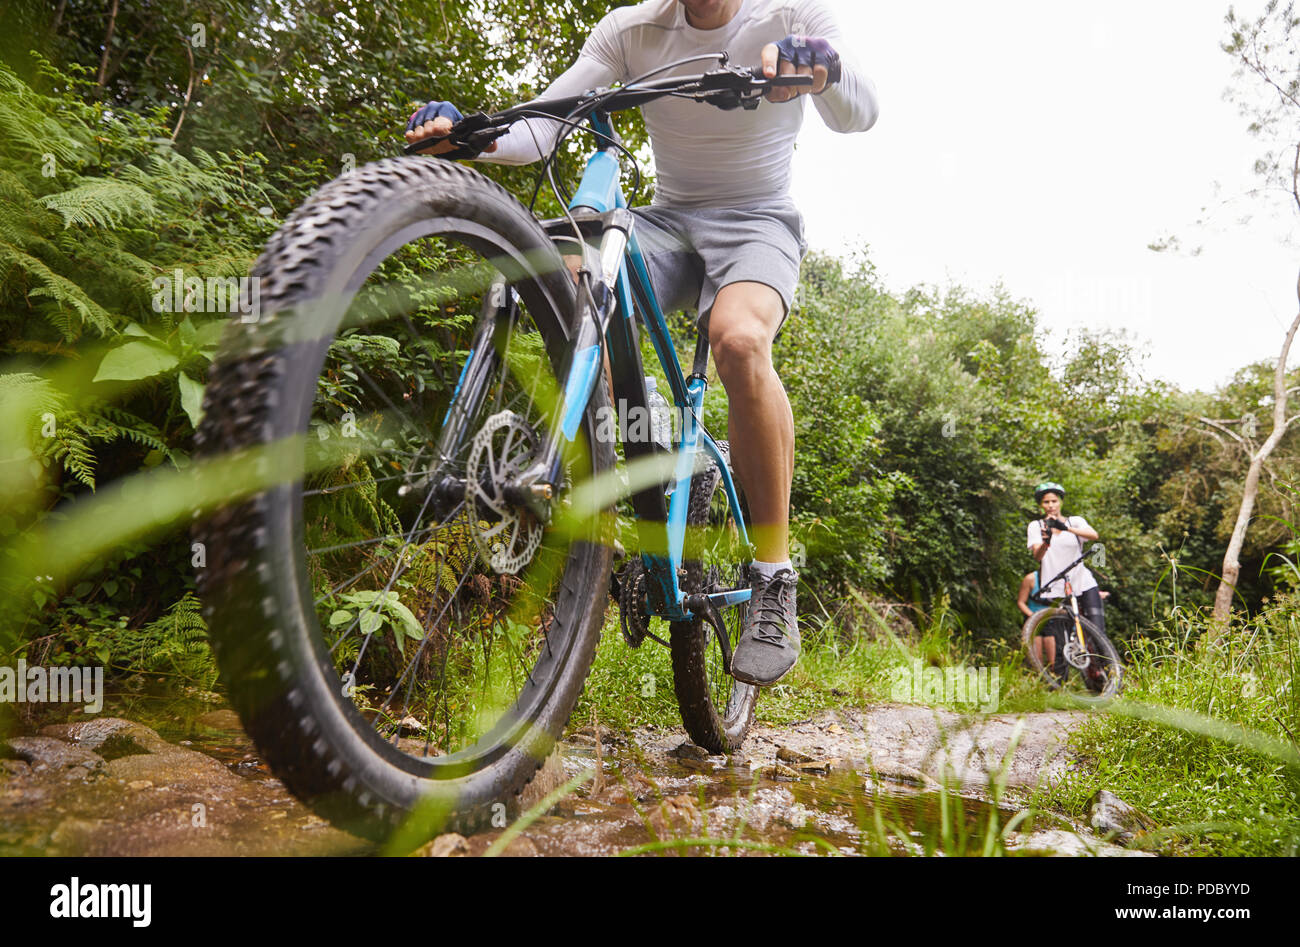 Muddy Bicycle High Resolution Stock Photography and Images - Alamy